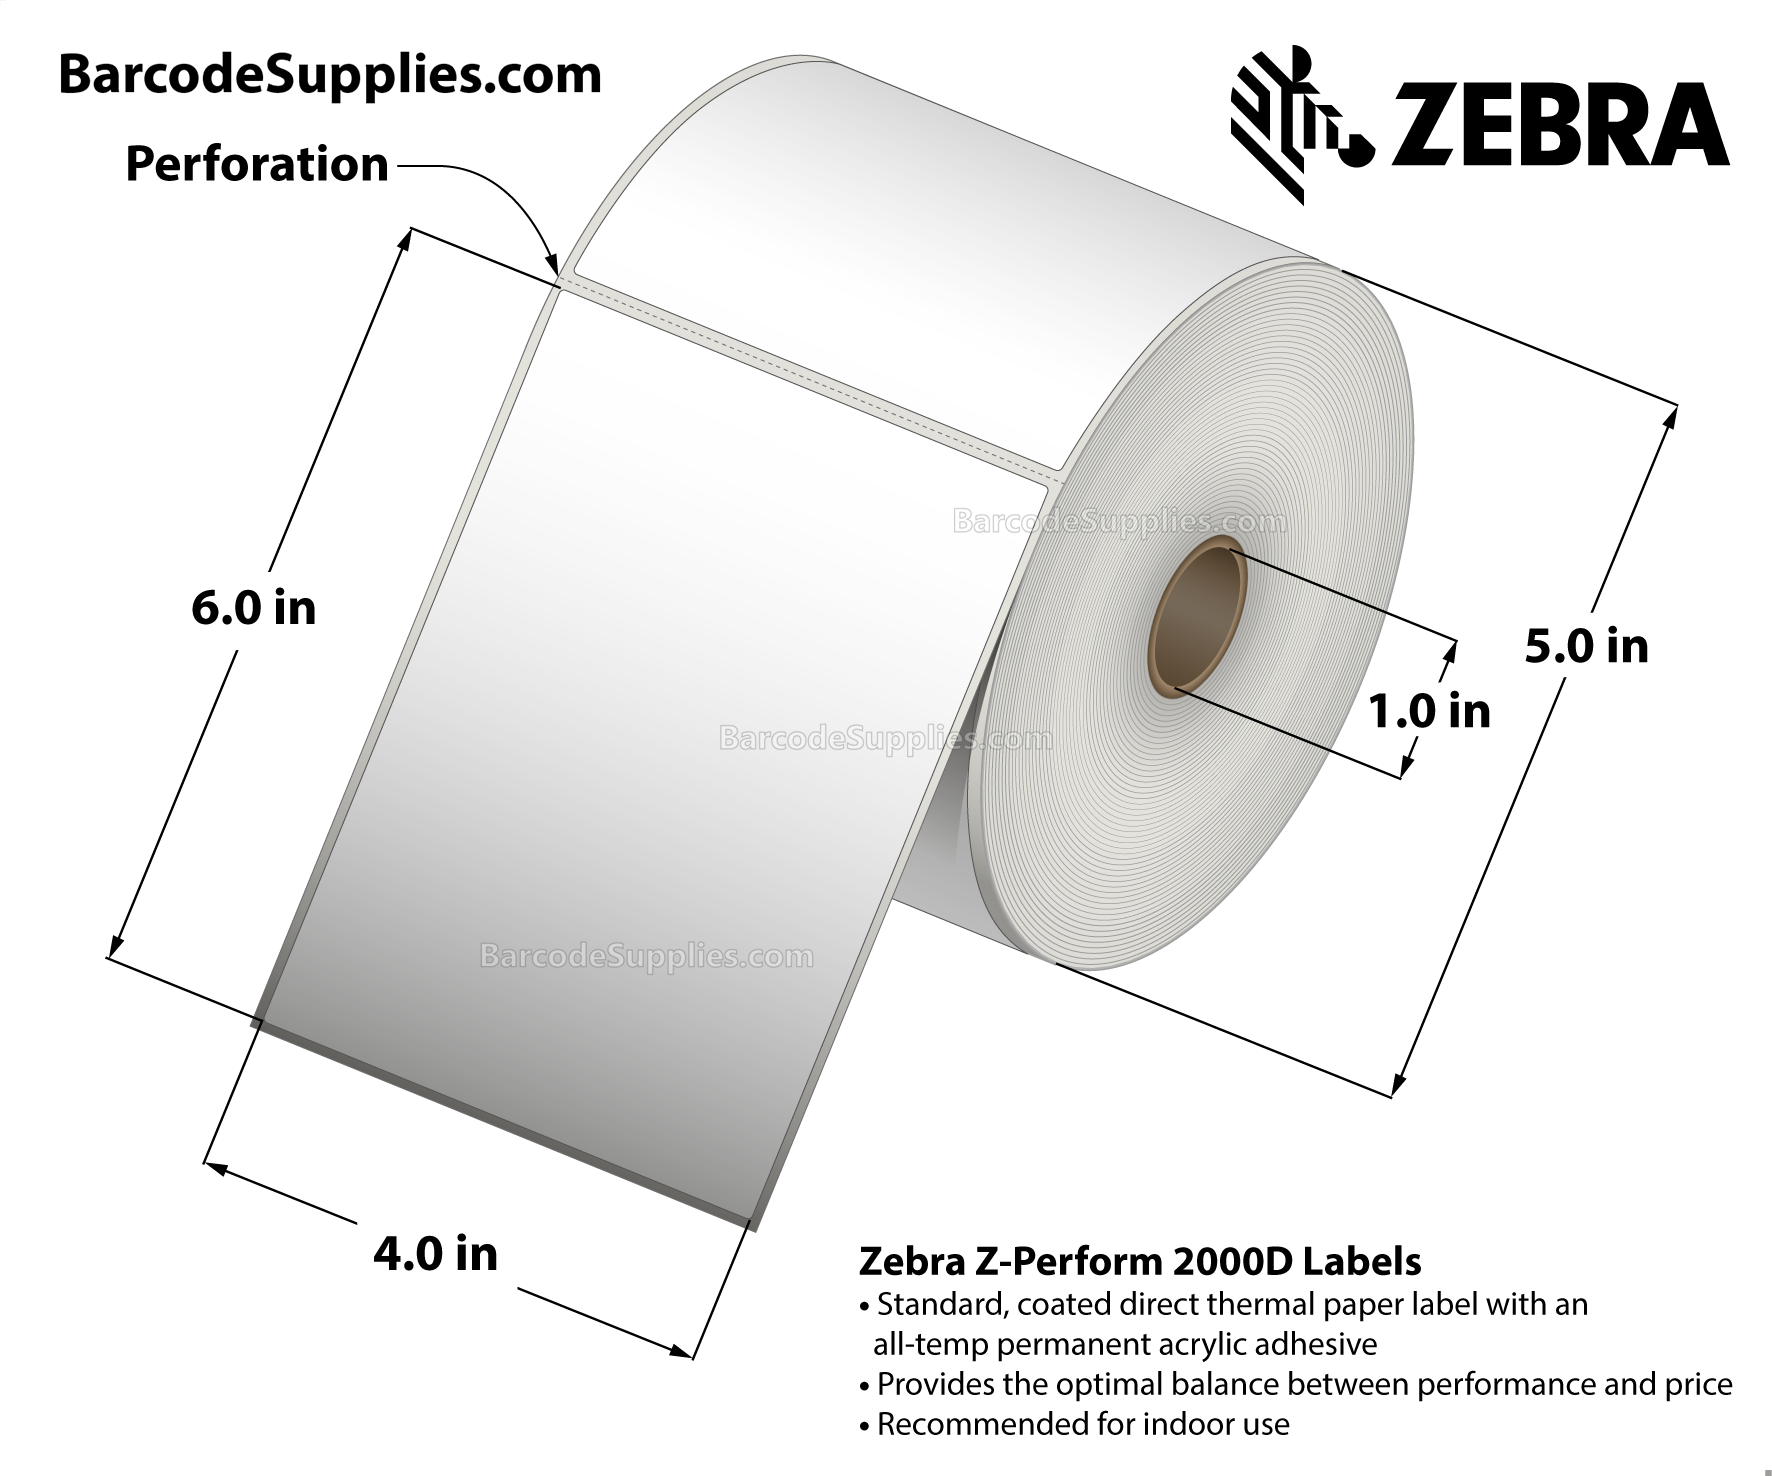 4 x 6 Direct Thermal White Z-Perform 2000D Labels With All-Temp Adhesive - Perforated - 430 Labels Per Roll - Carton Of 6 Rolls - 2580 Labels Total - MPN: 10010034